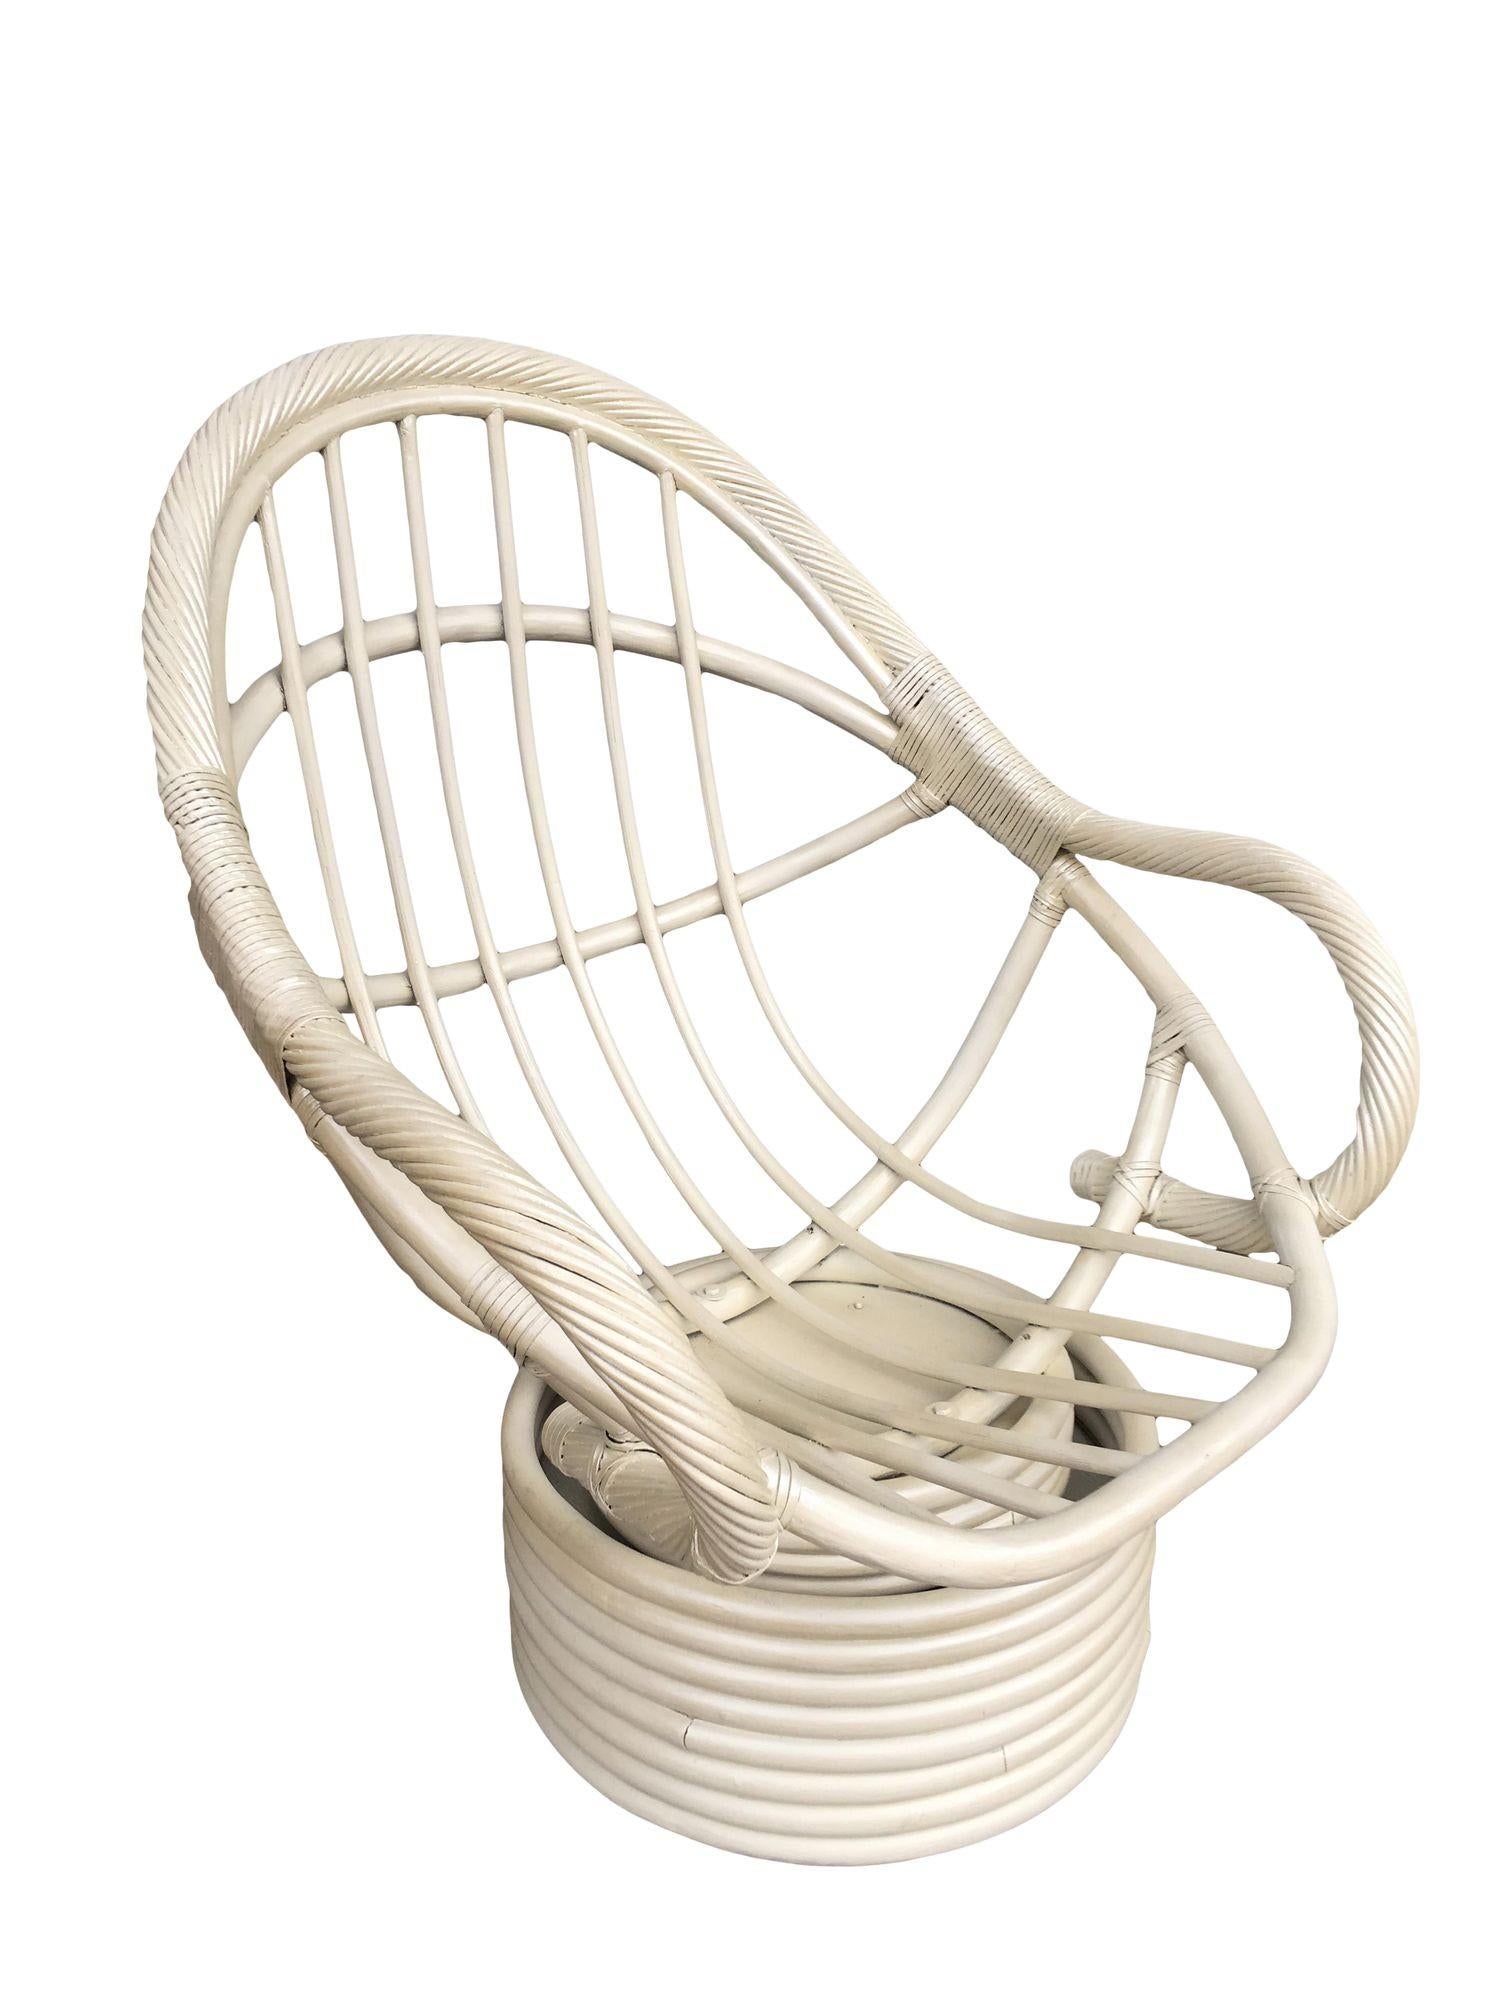 Designed in the manner of Paul Frankl, this restored rattan lounge chair features arched arms with a built-in footrest. The chair comes in its original white painted finished which has been restored by Tropical Sun Rattan

1950, United